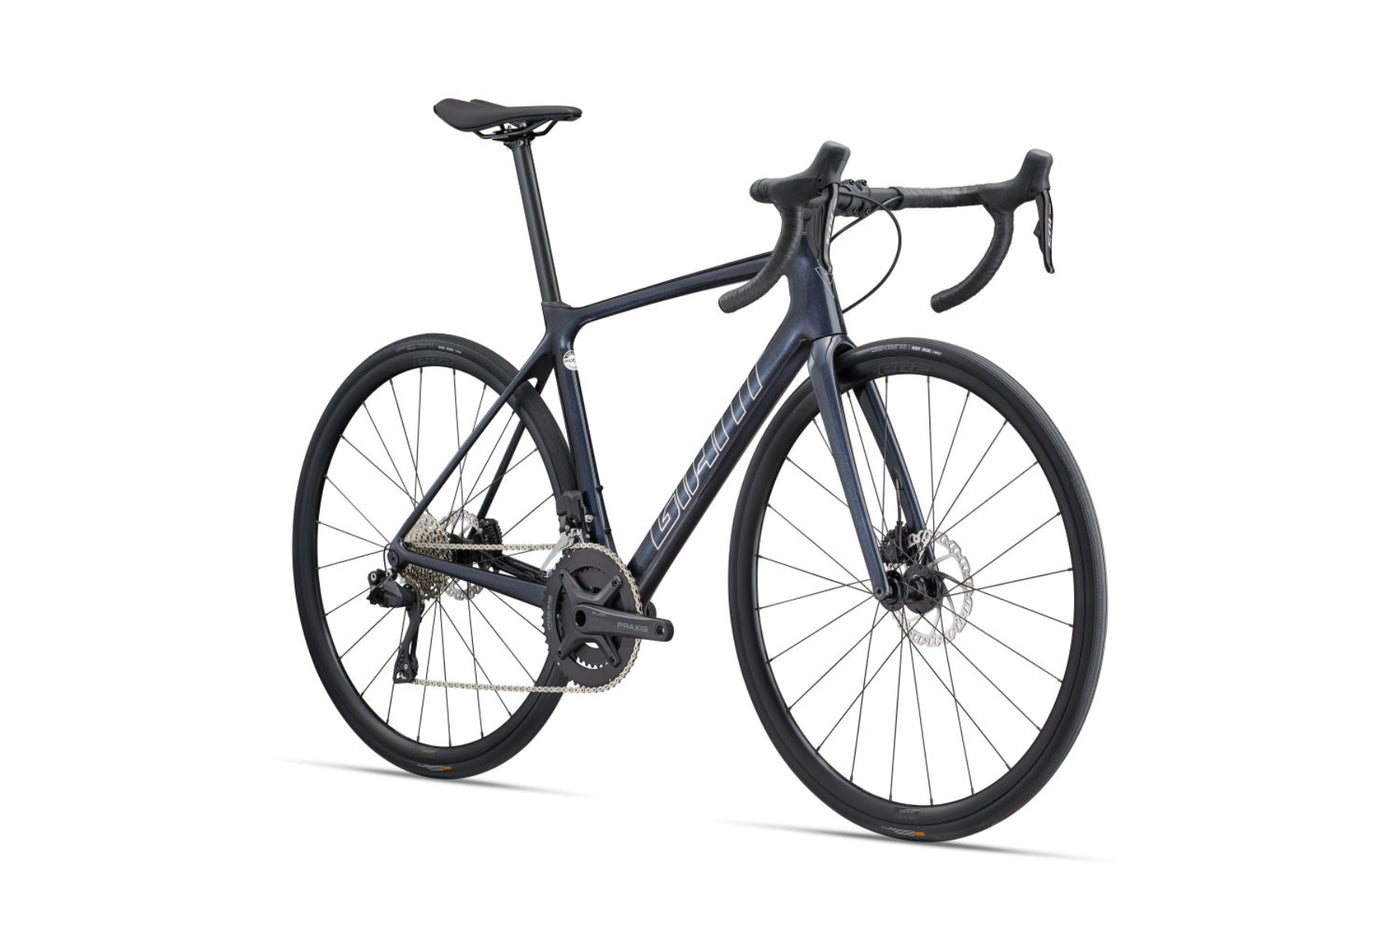 TCR Advanced Disc 1 Pro Compact - Cold Night